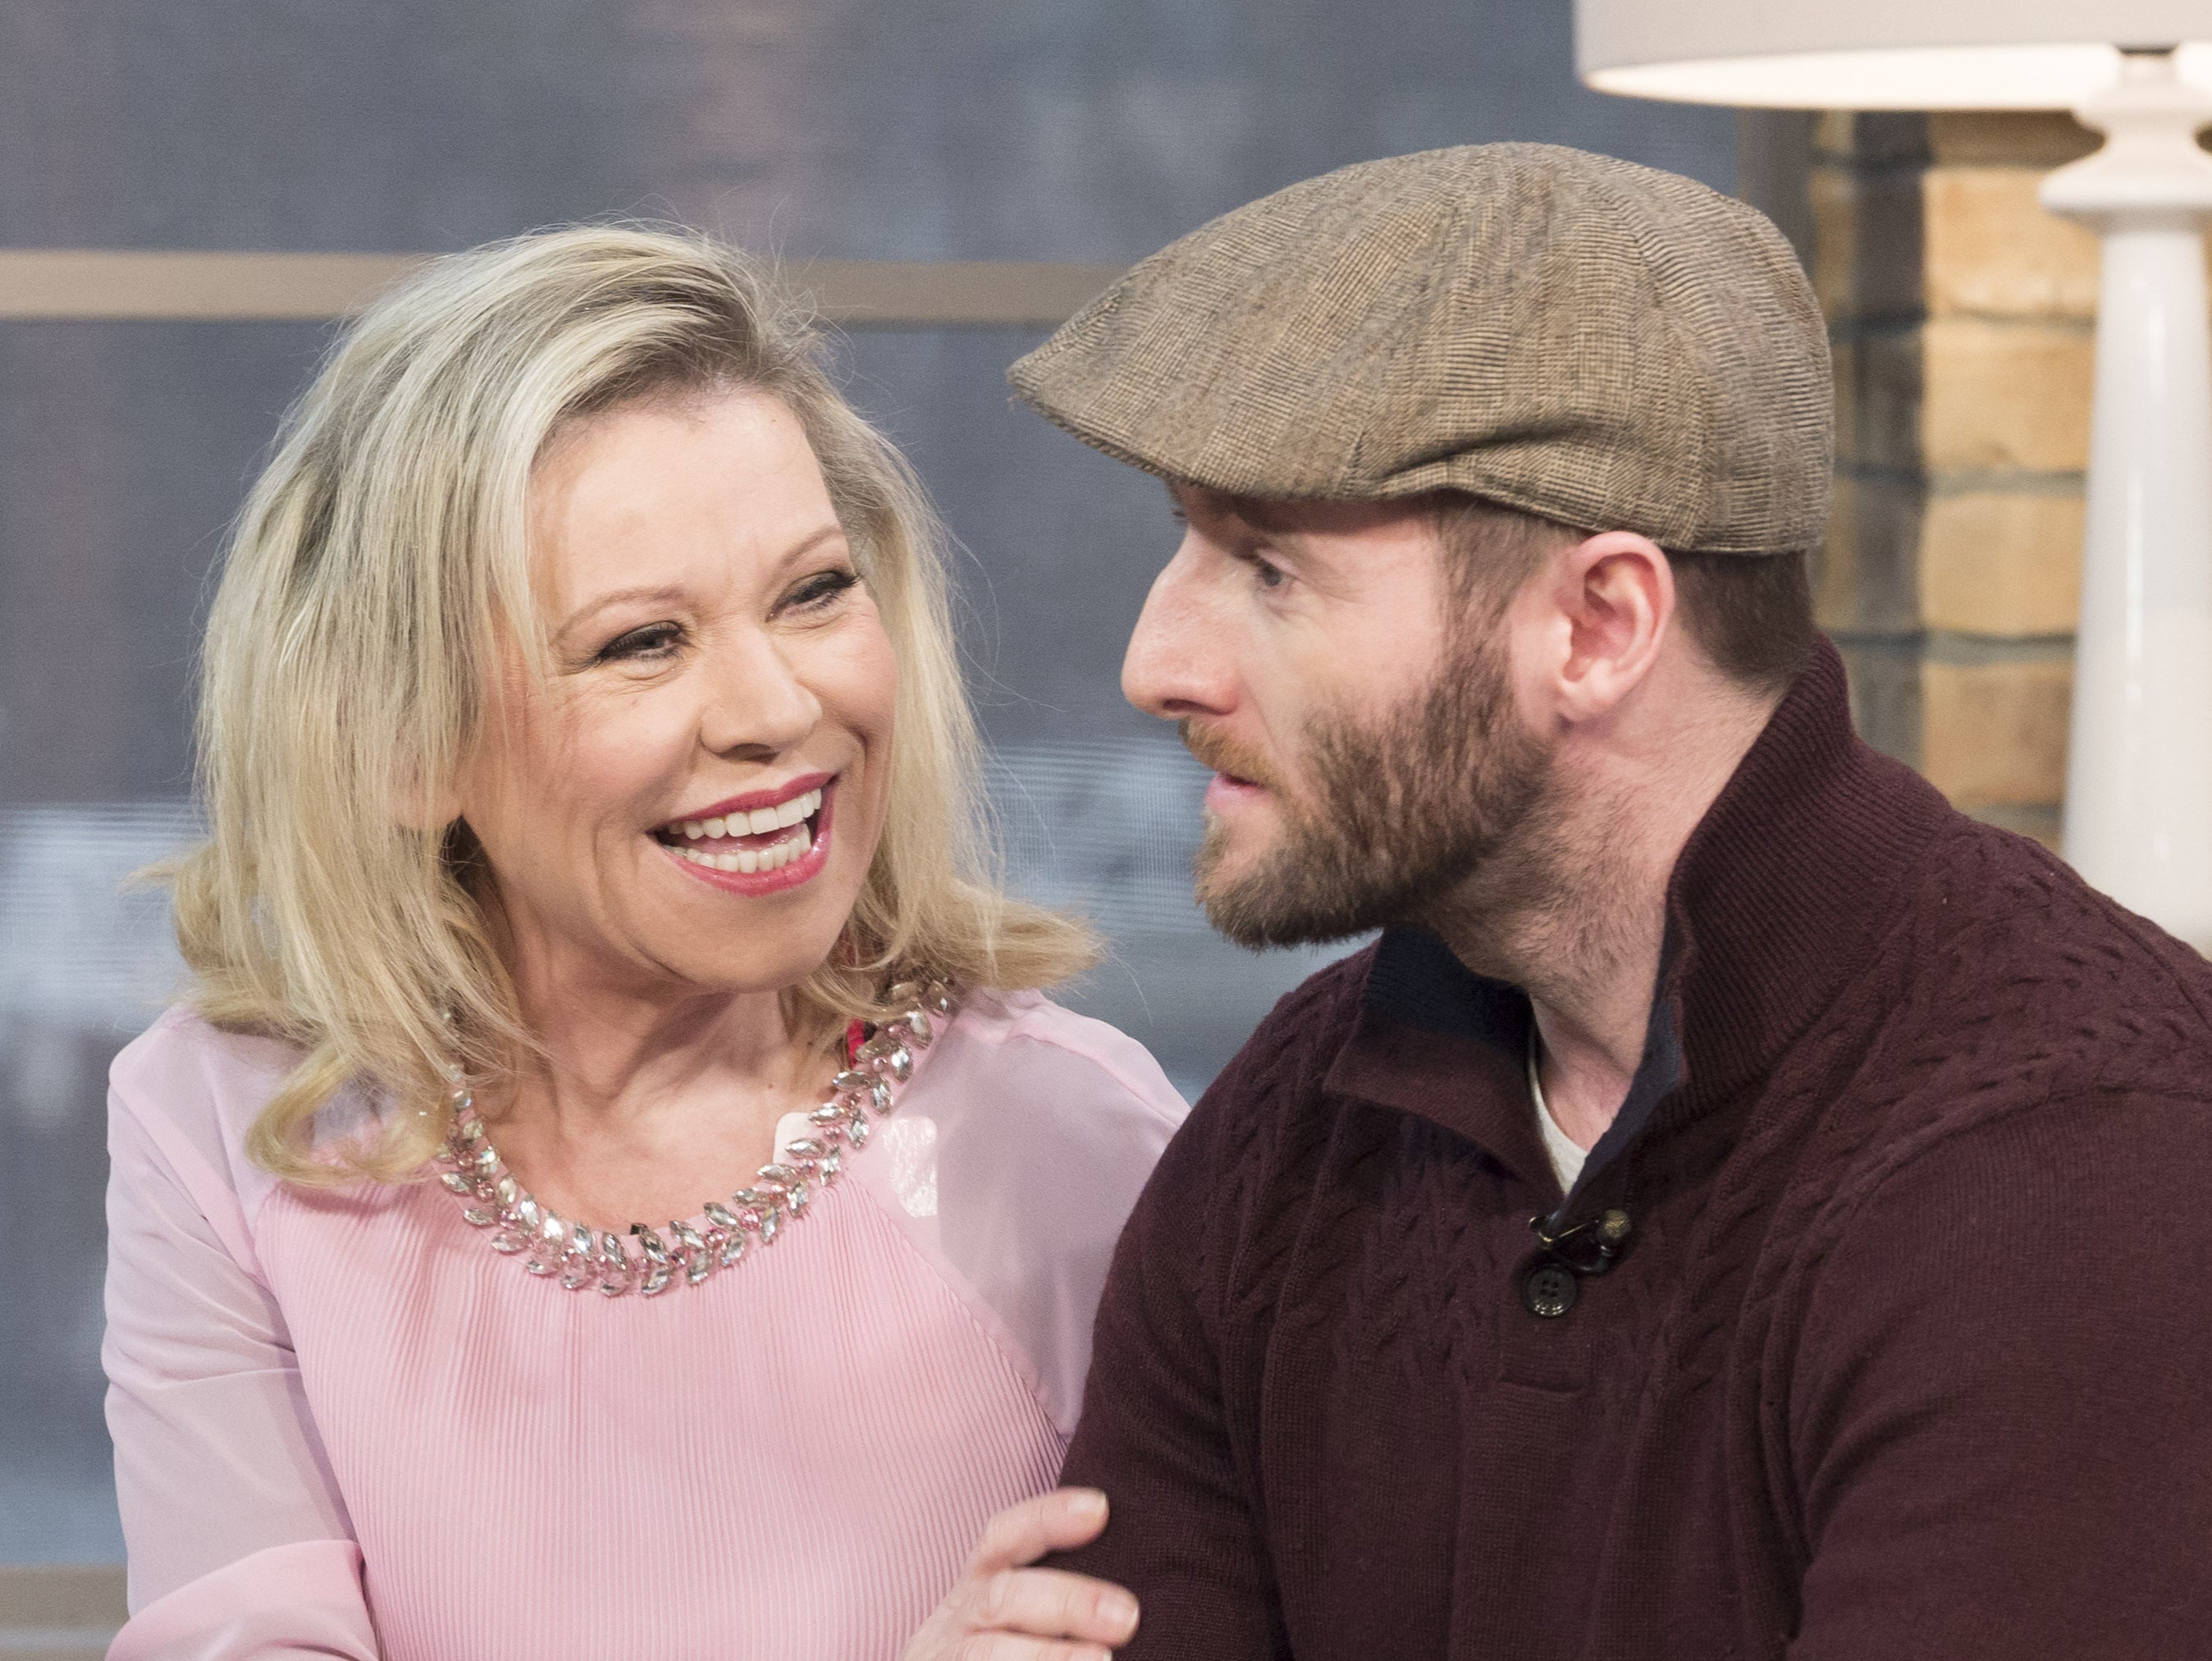 Tina Malone and Paul Chase on ‘This Morning’ in 2017